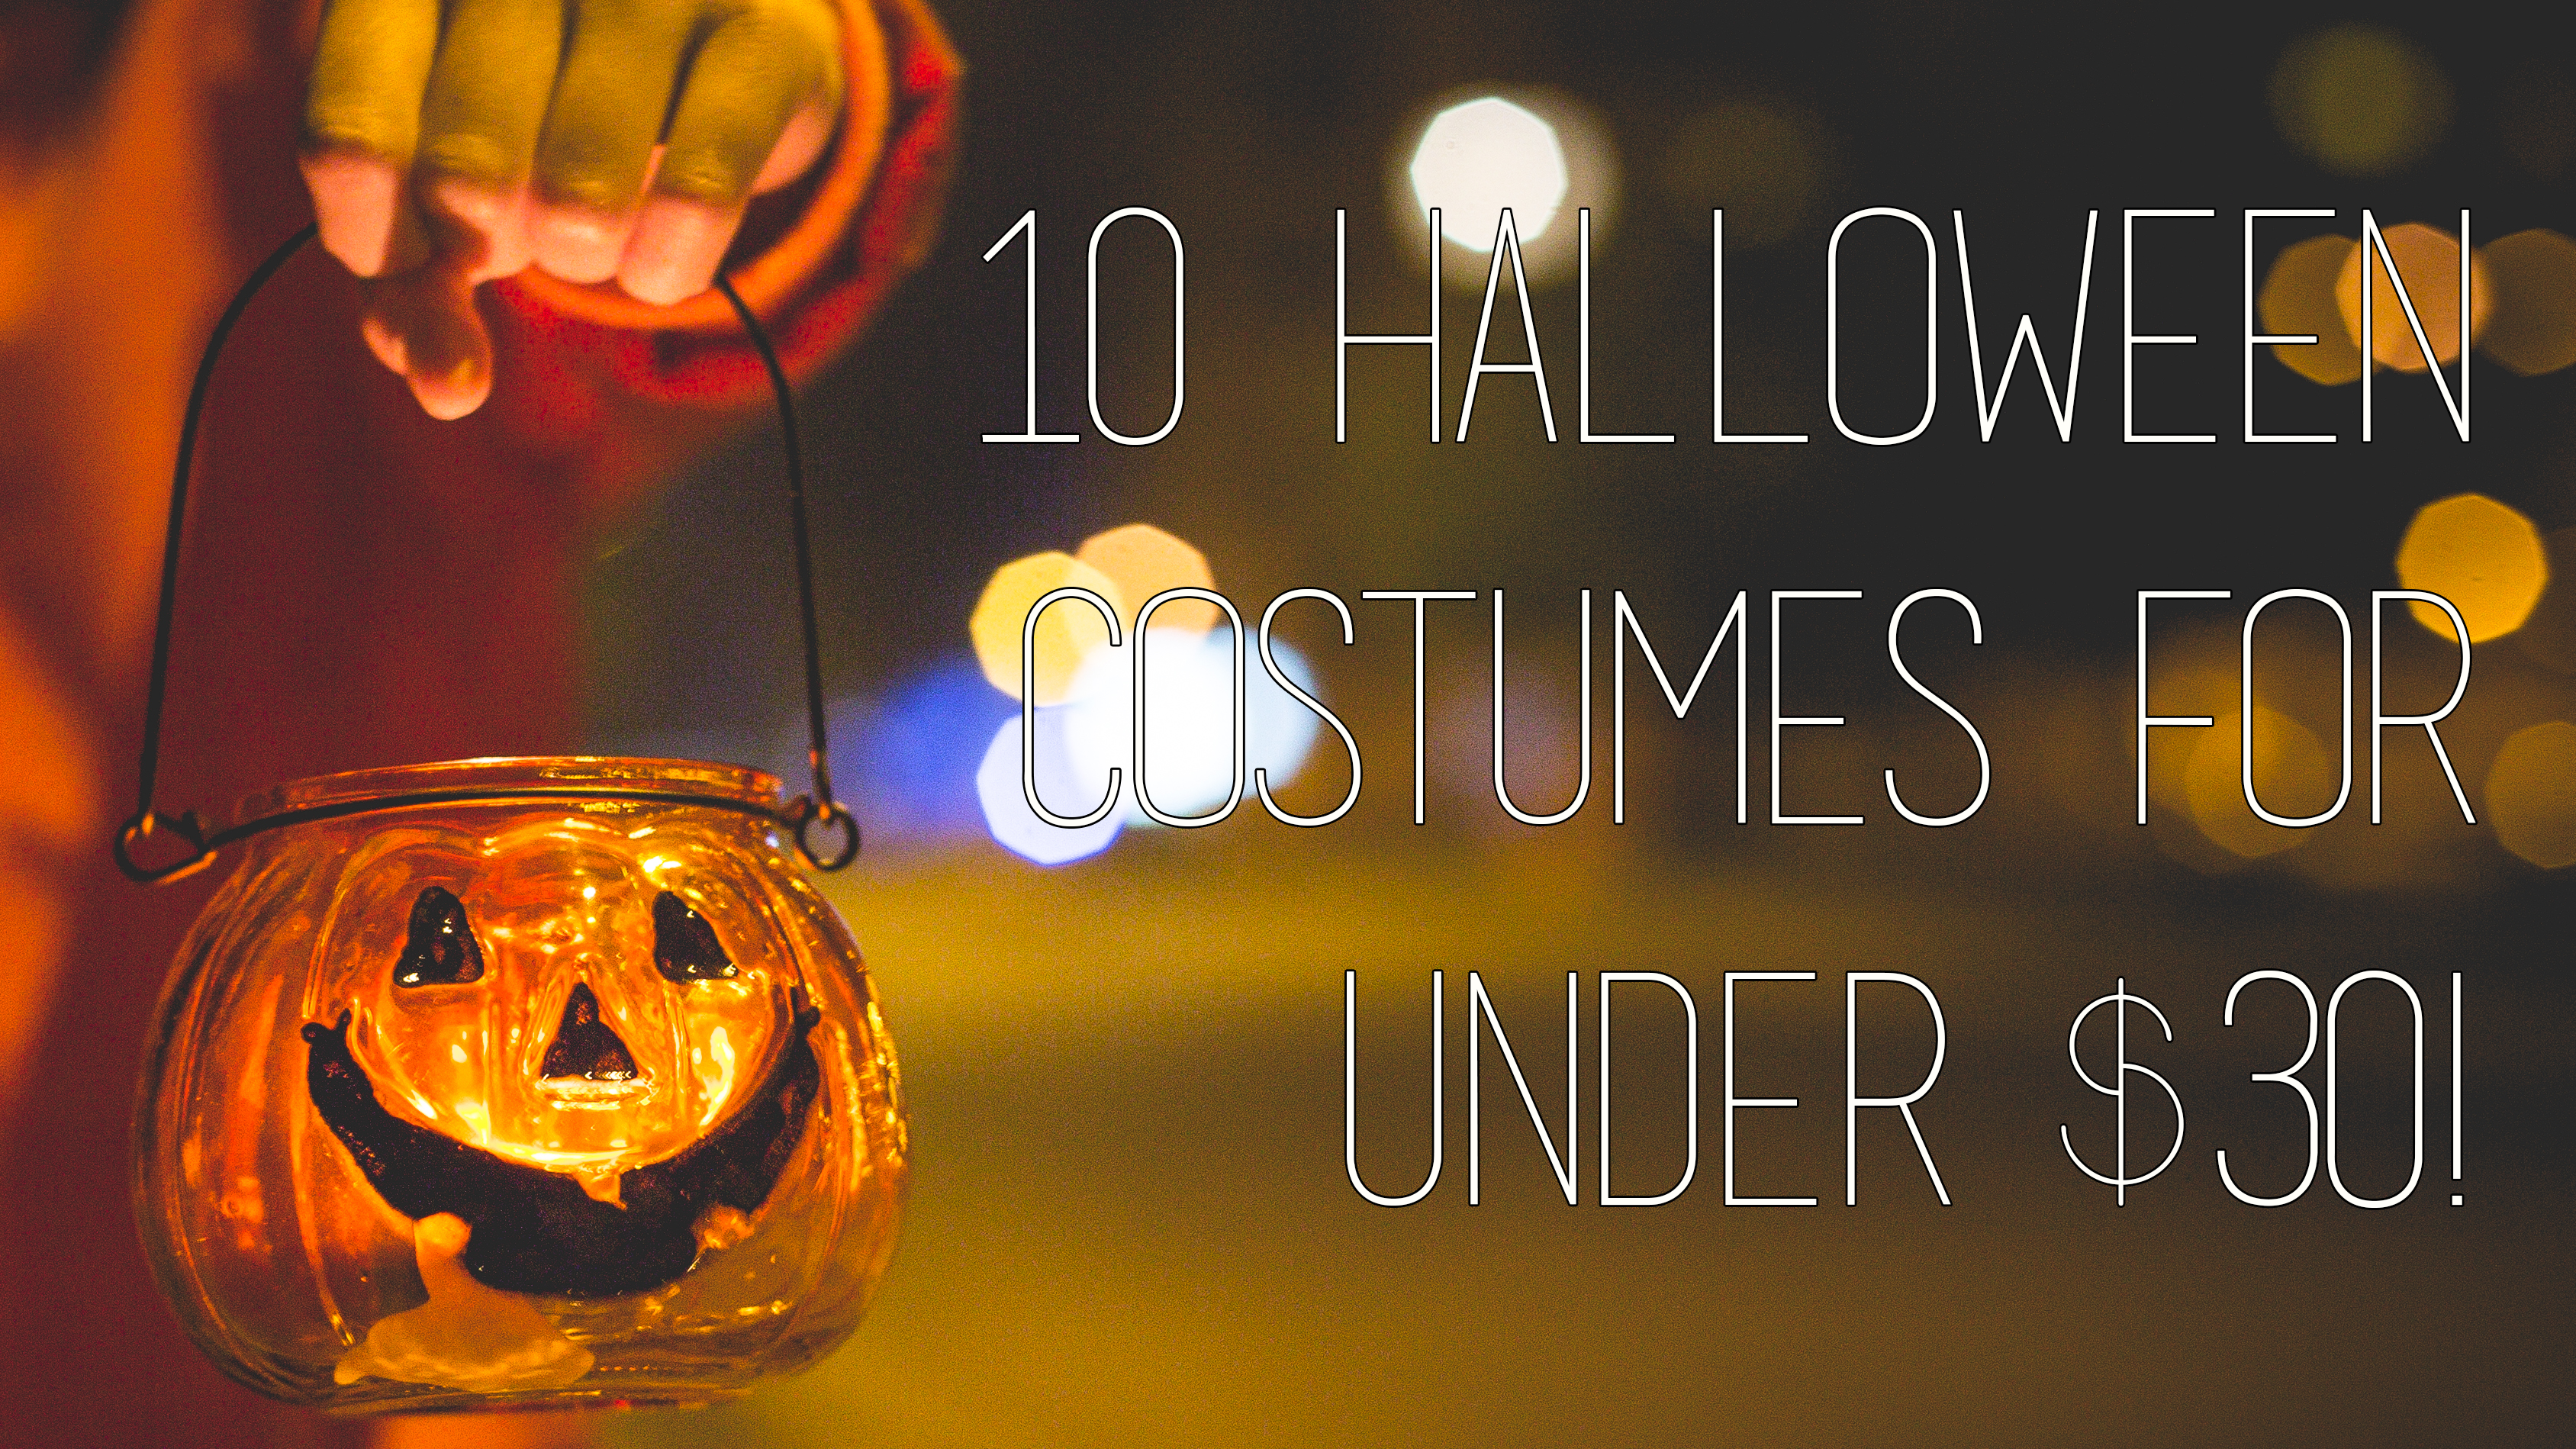 10 Halloween Costumes for Under $30!